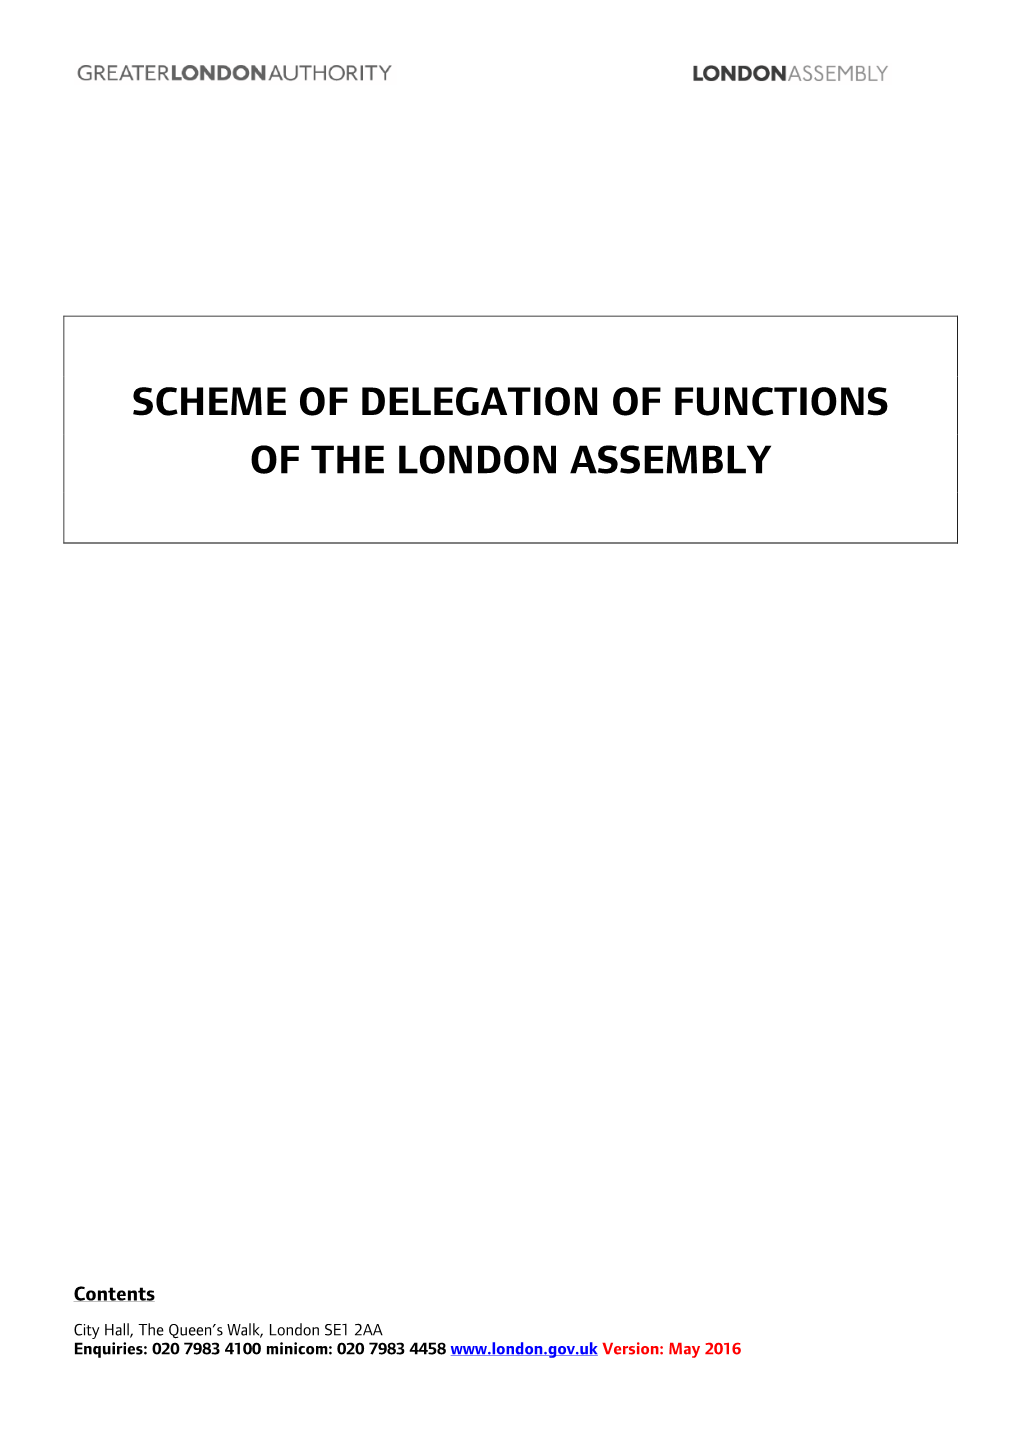 Scheme of Delegation of Functions of the London Assembly